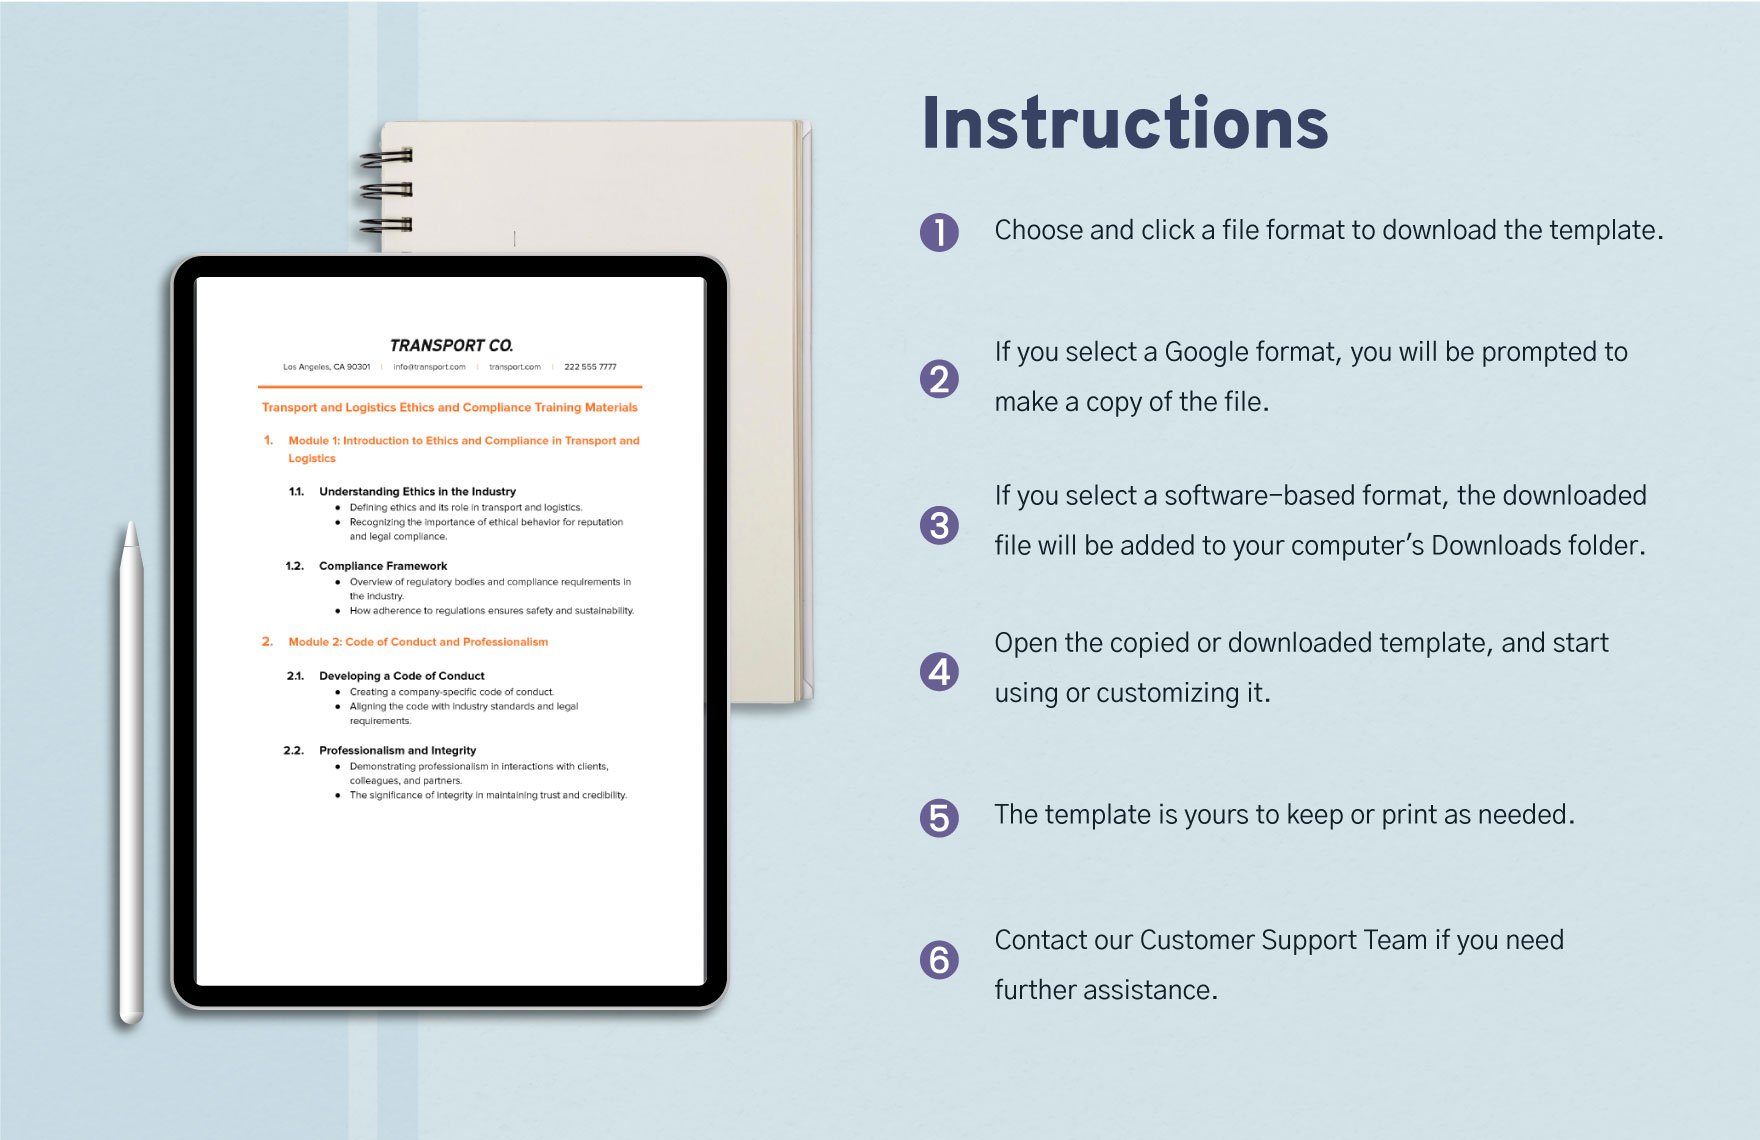 Transport and Logistics Ethics and Compliance Training Materials Template